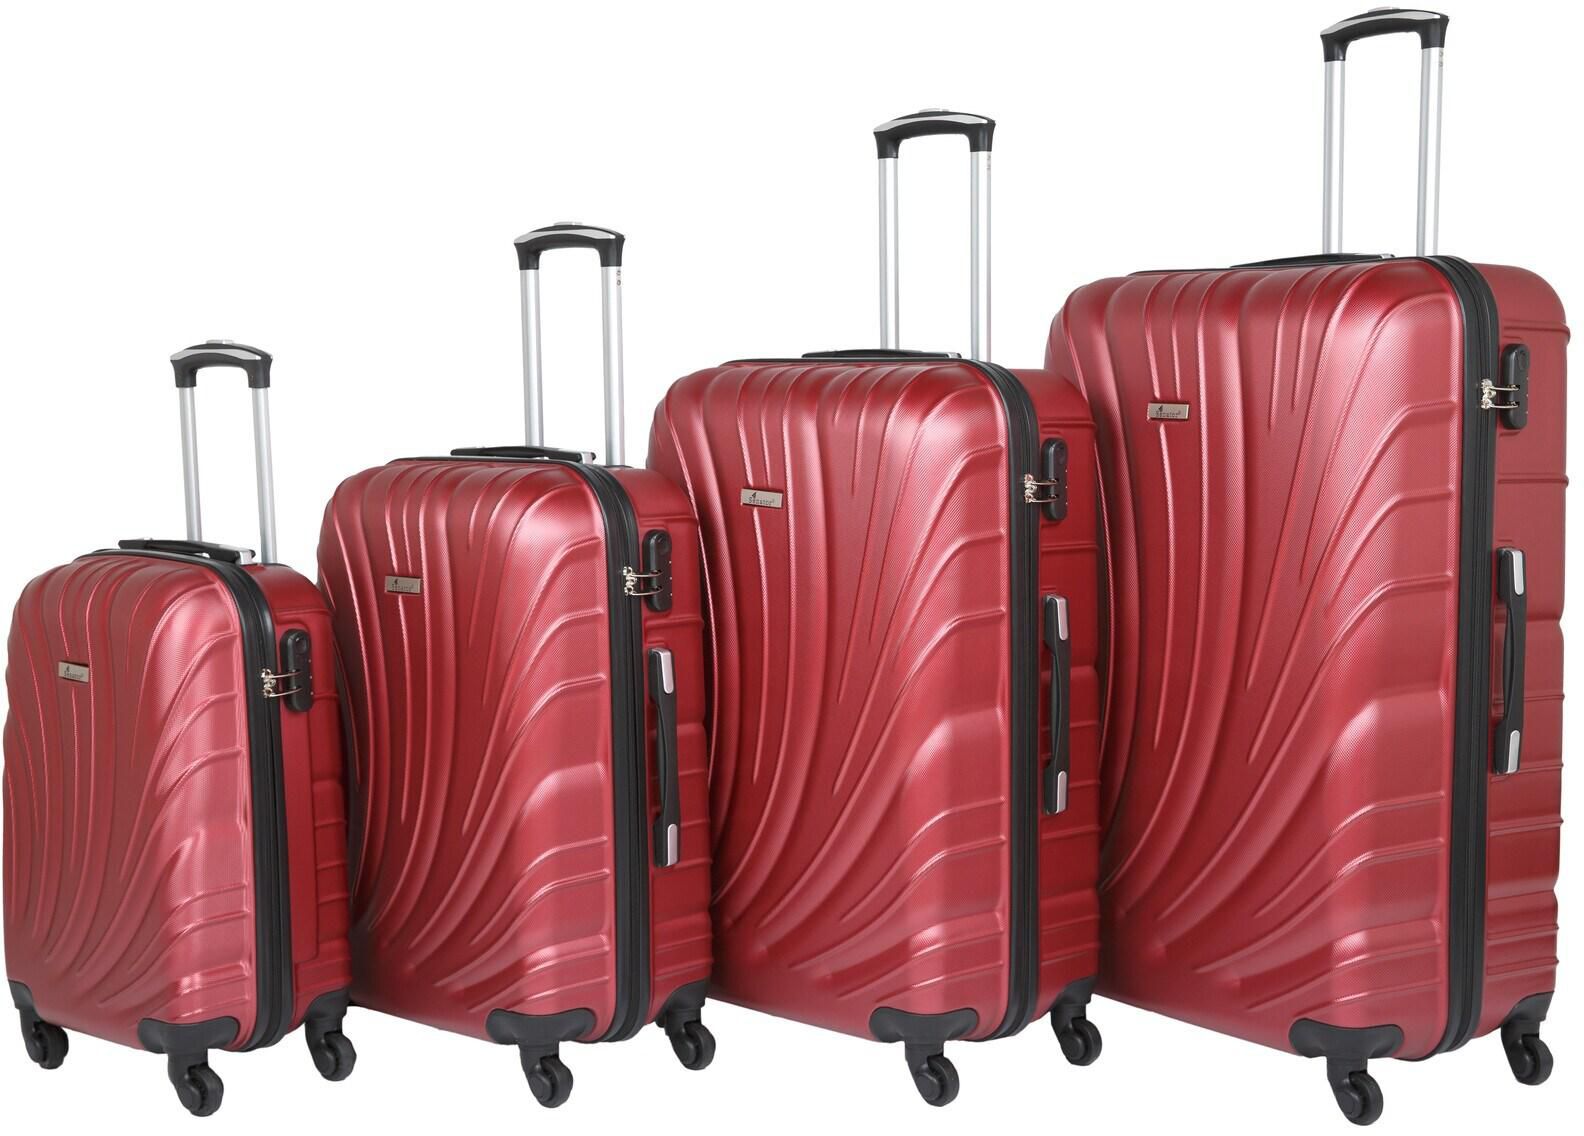 Senator Hard Case Trolley Luggage Set of 4 Suitcase for Unisex ABS Lightweight Travel Bag with 4 Spinner Wheels KH115 Burgundy